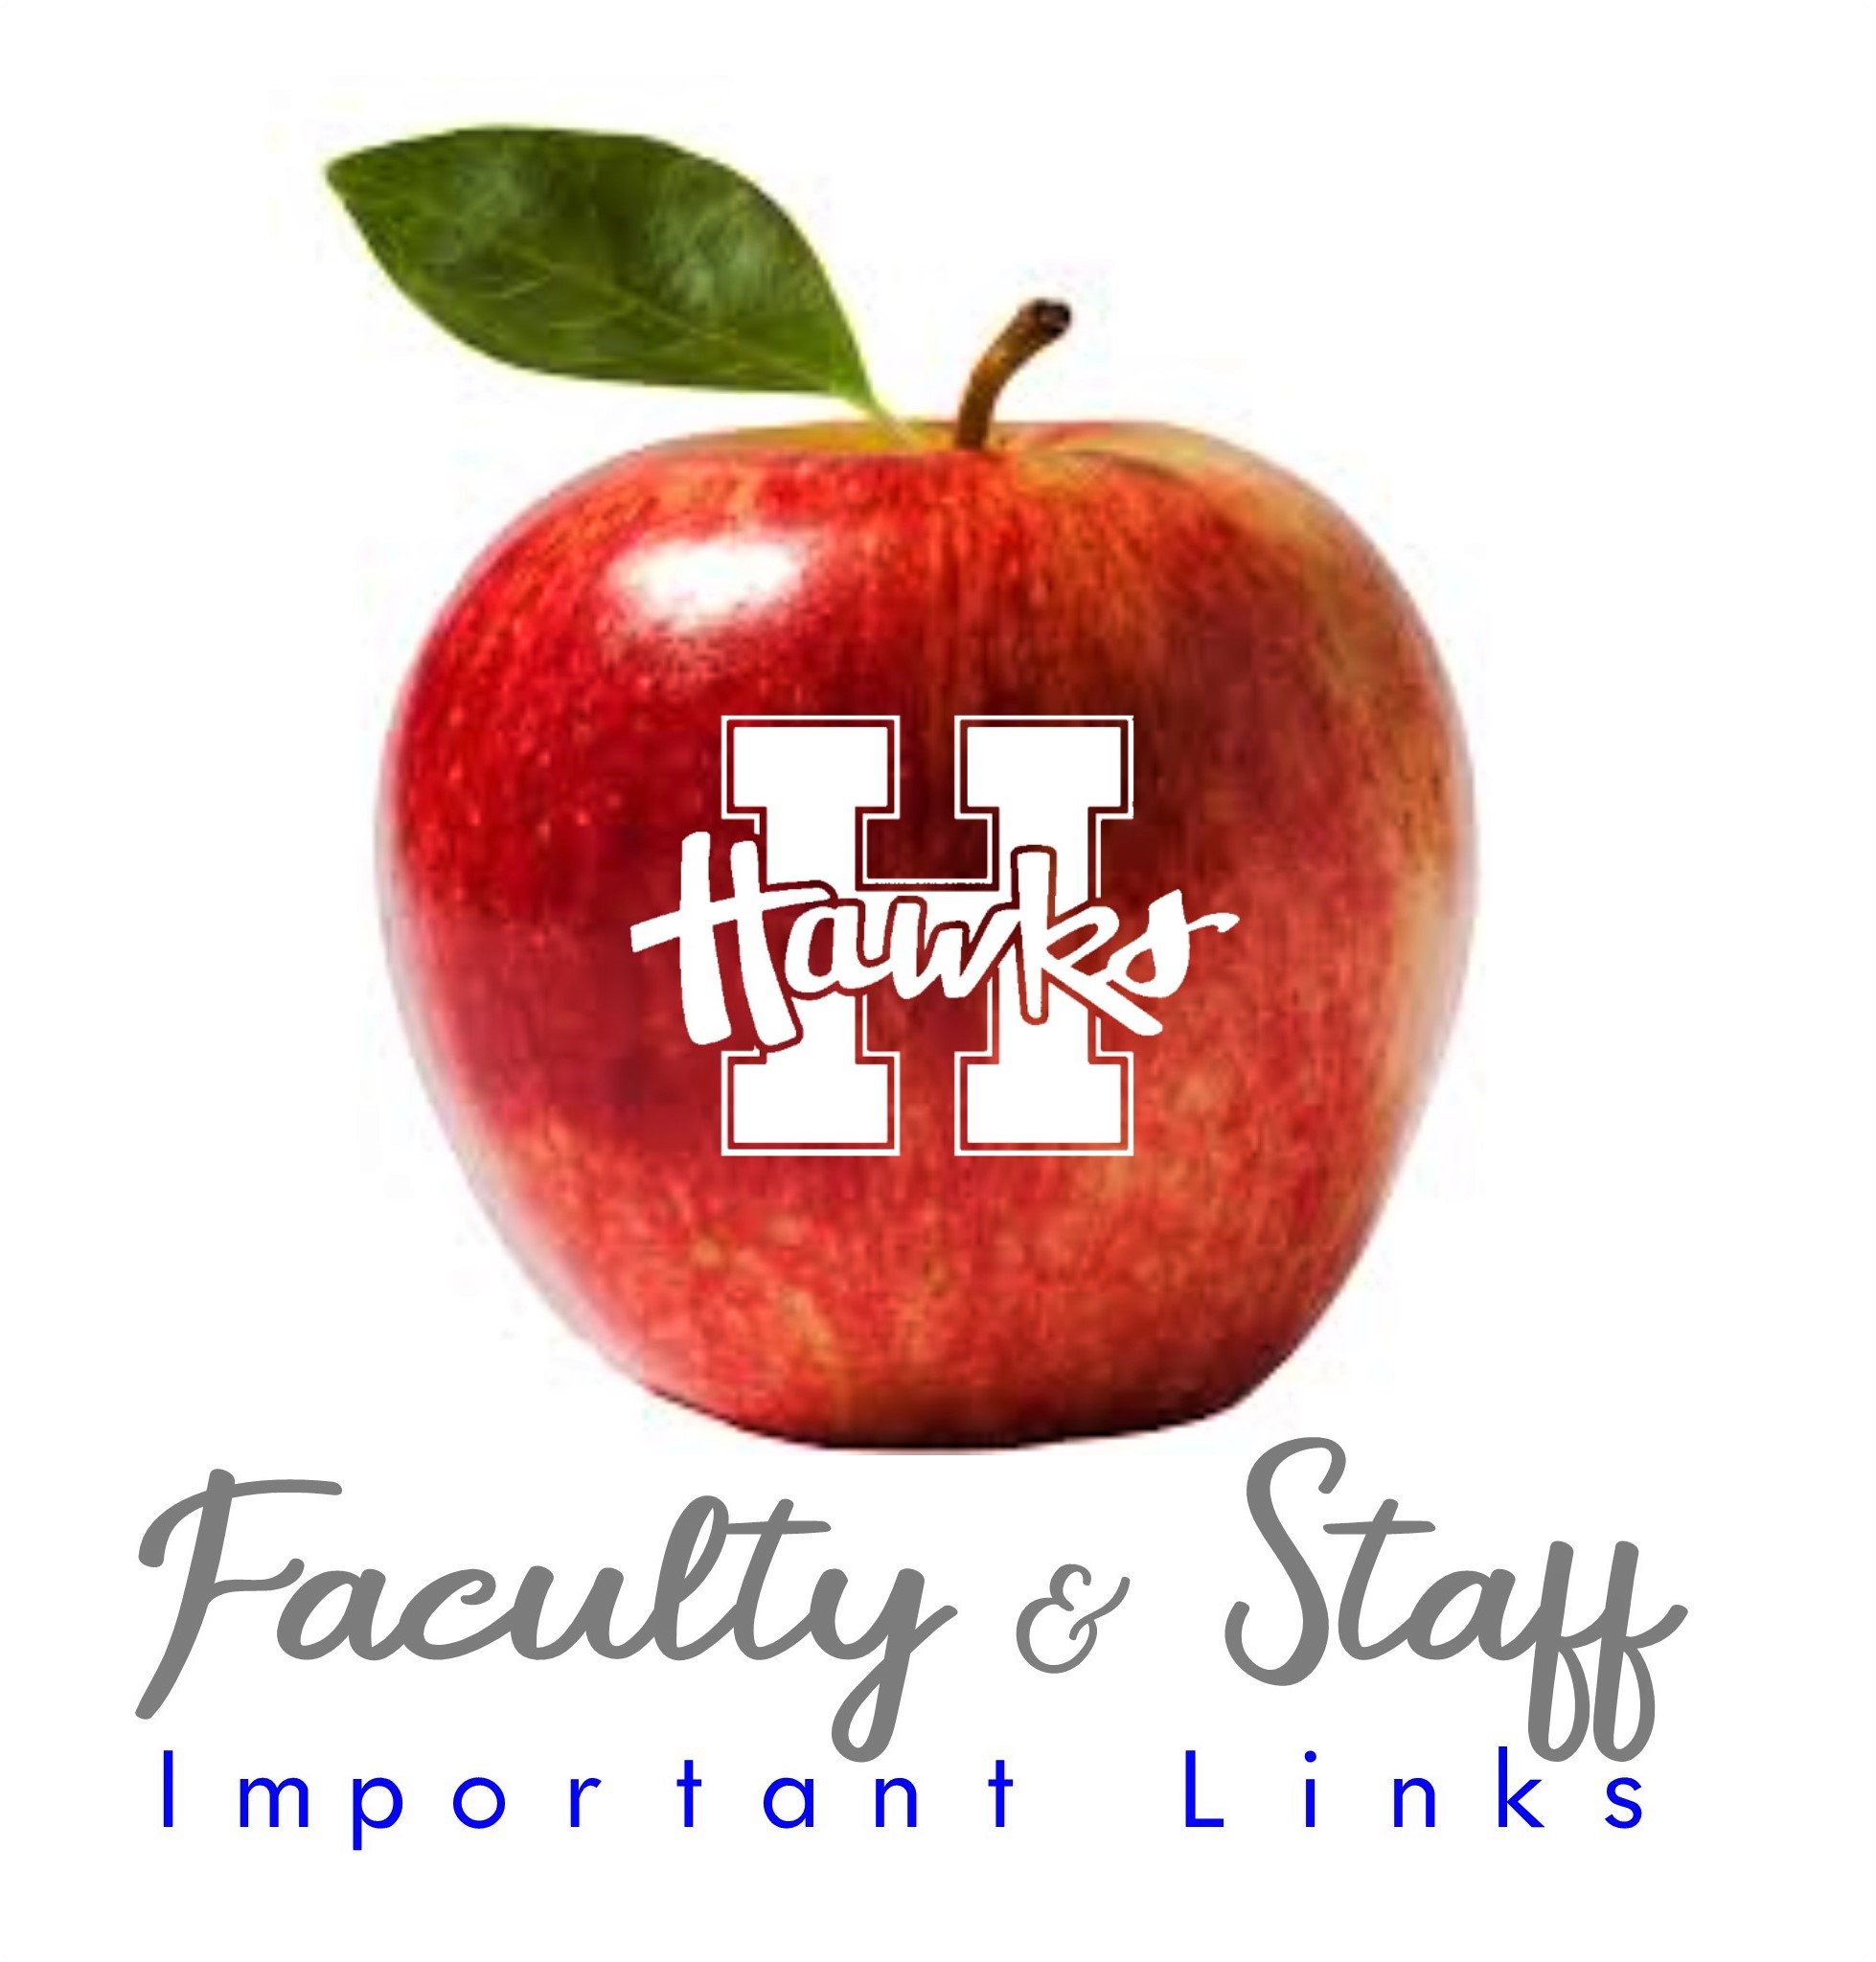 Faculty & Staff 